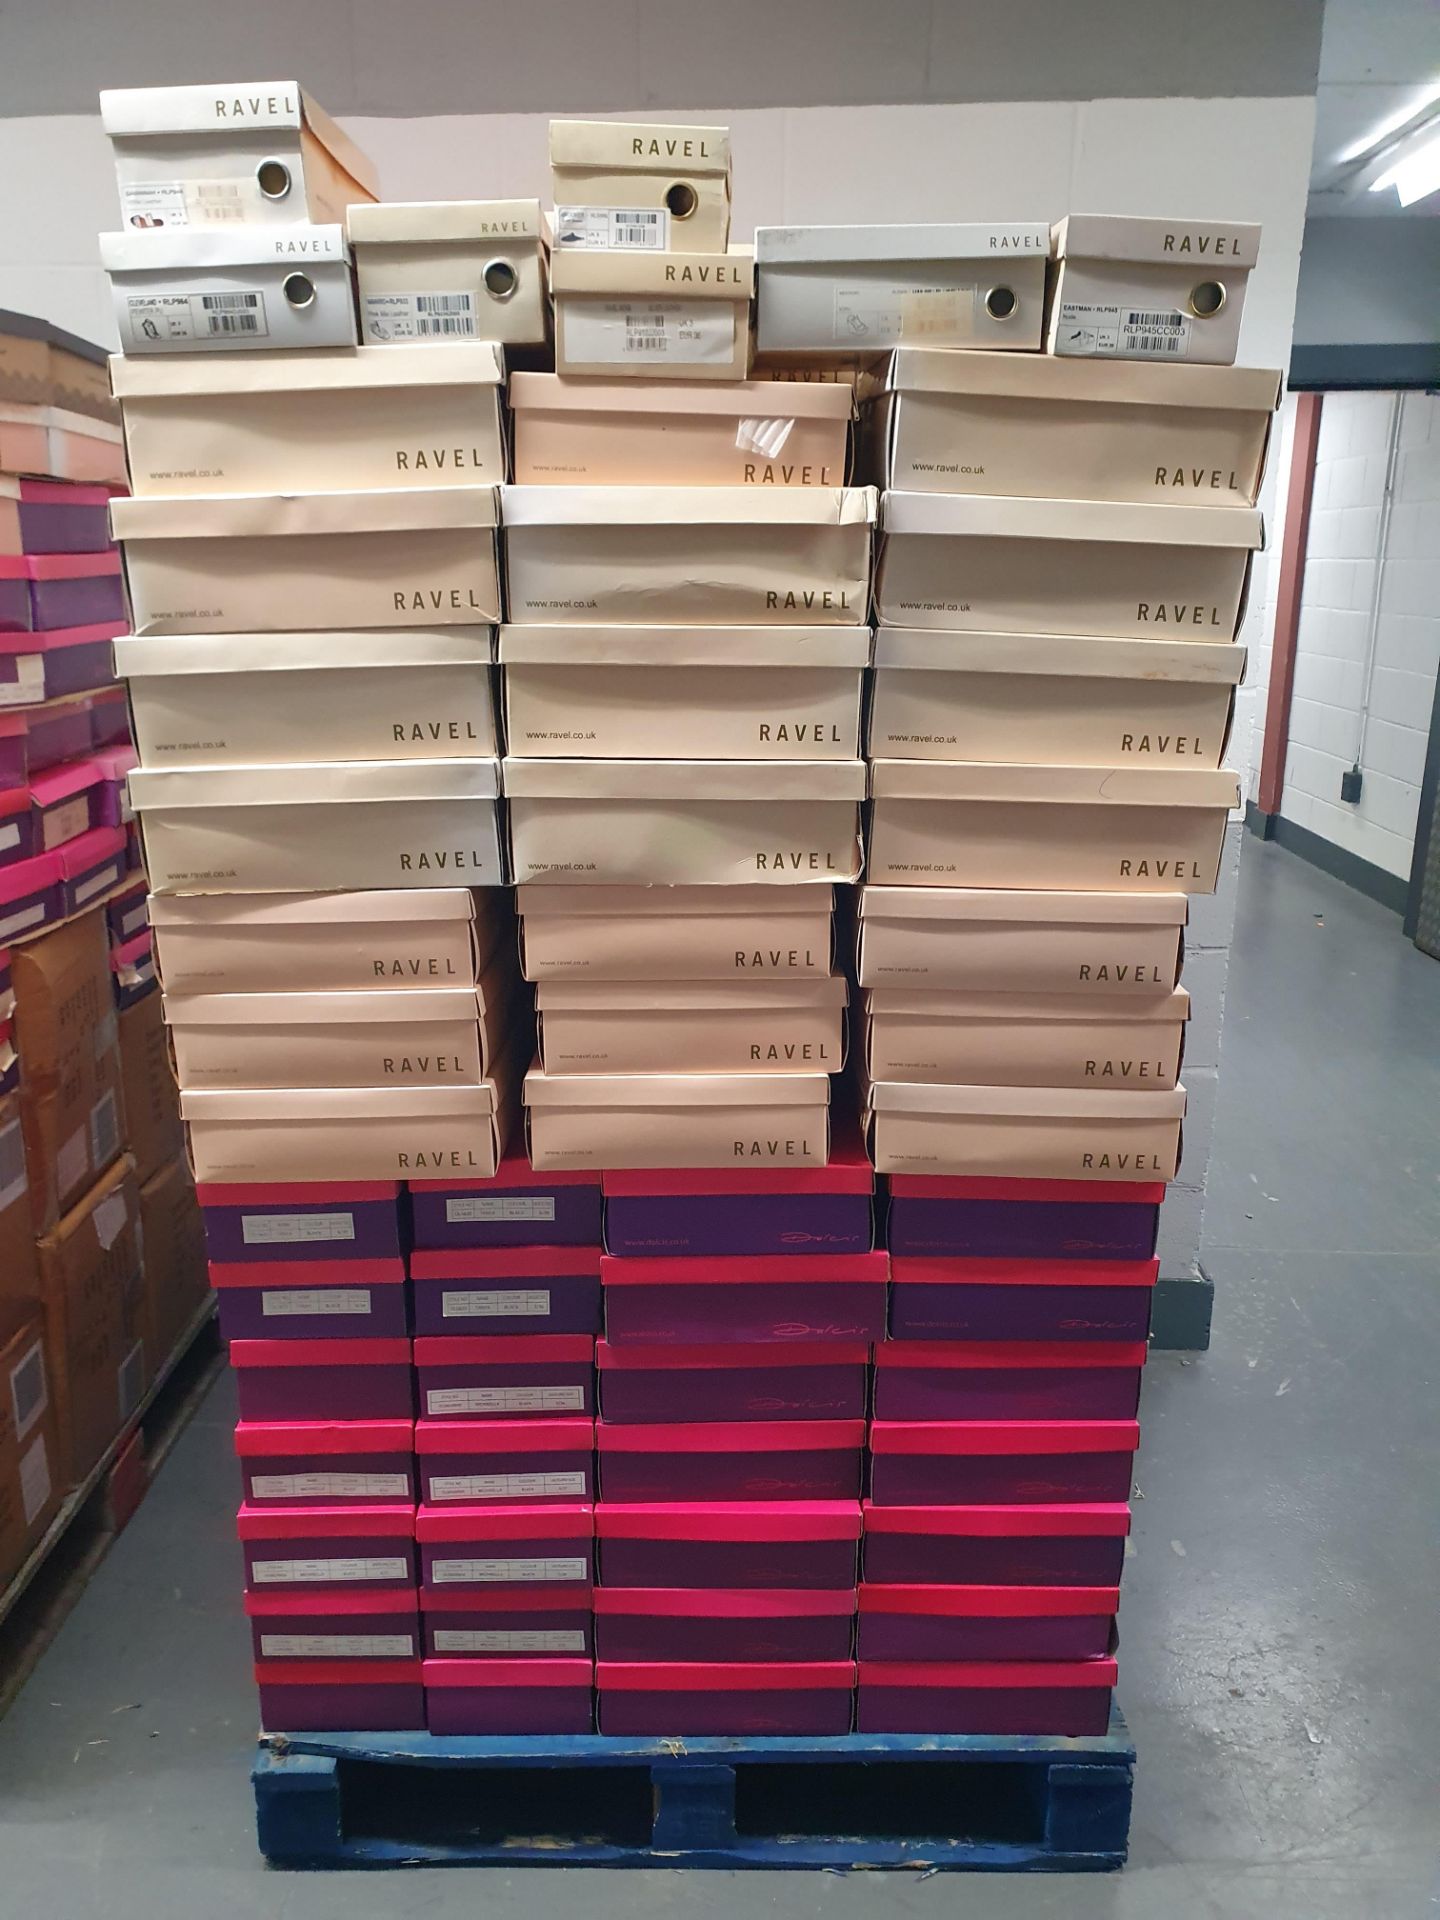 Pallet of 243 Pairs of Assorted Shoes - New/Boxed - CL907 - Ref: Pallet6 - Location: Chadderton